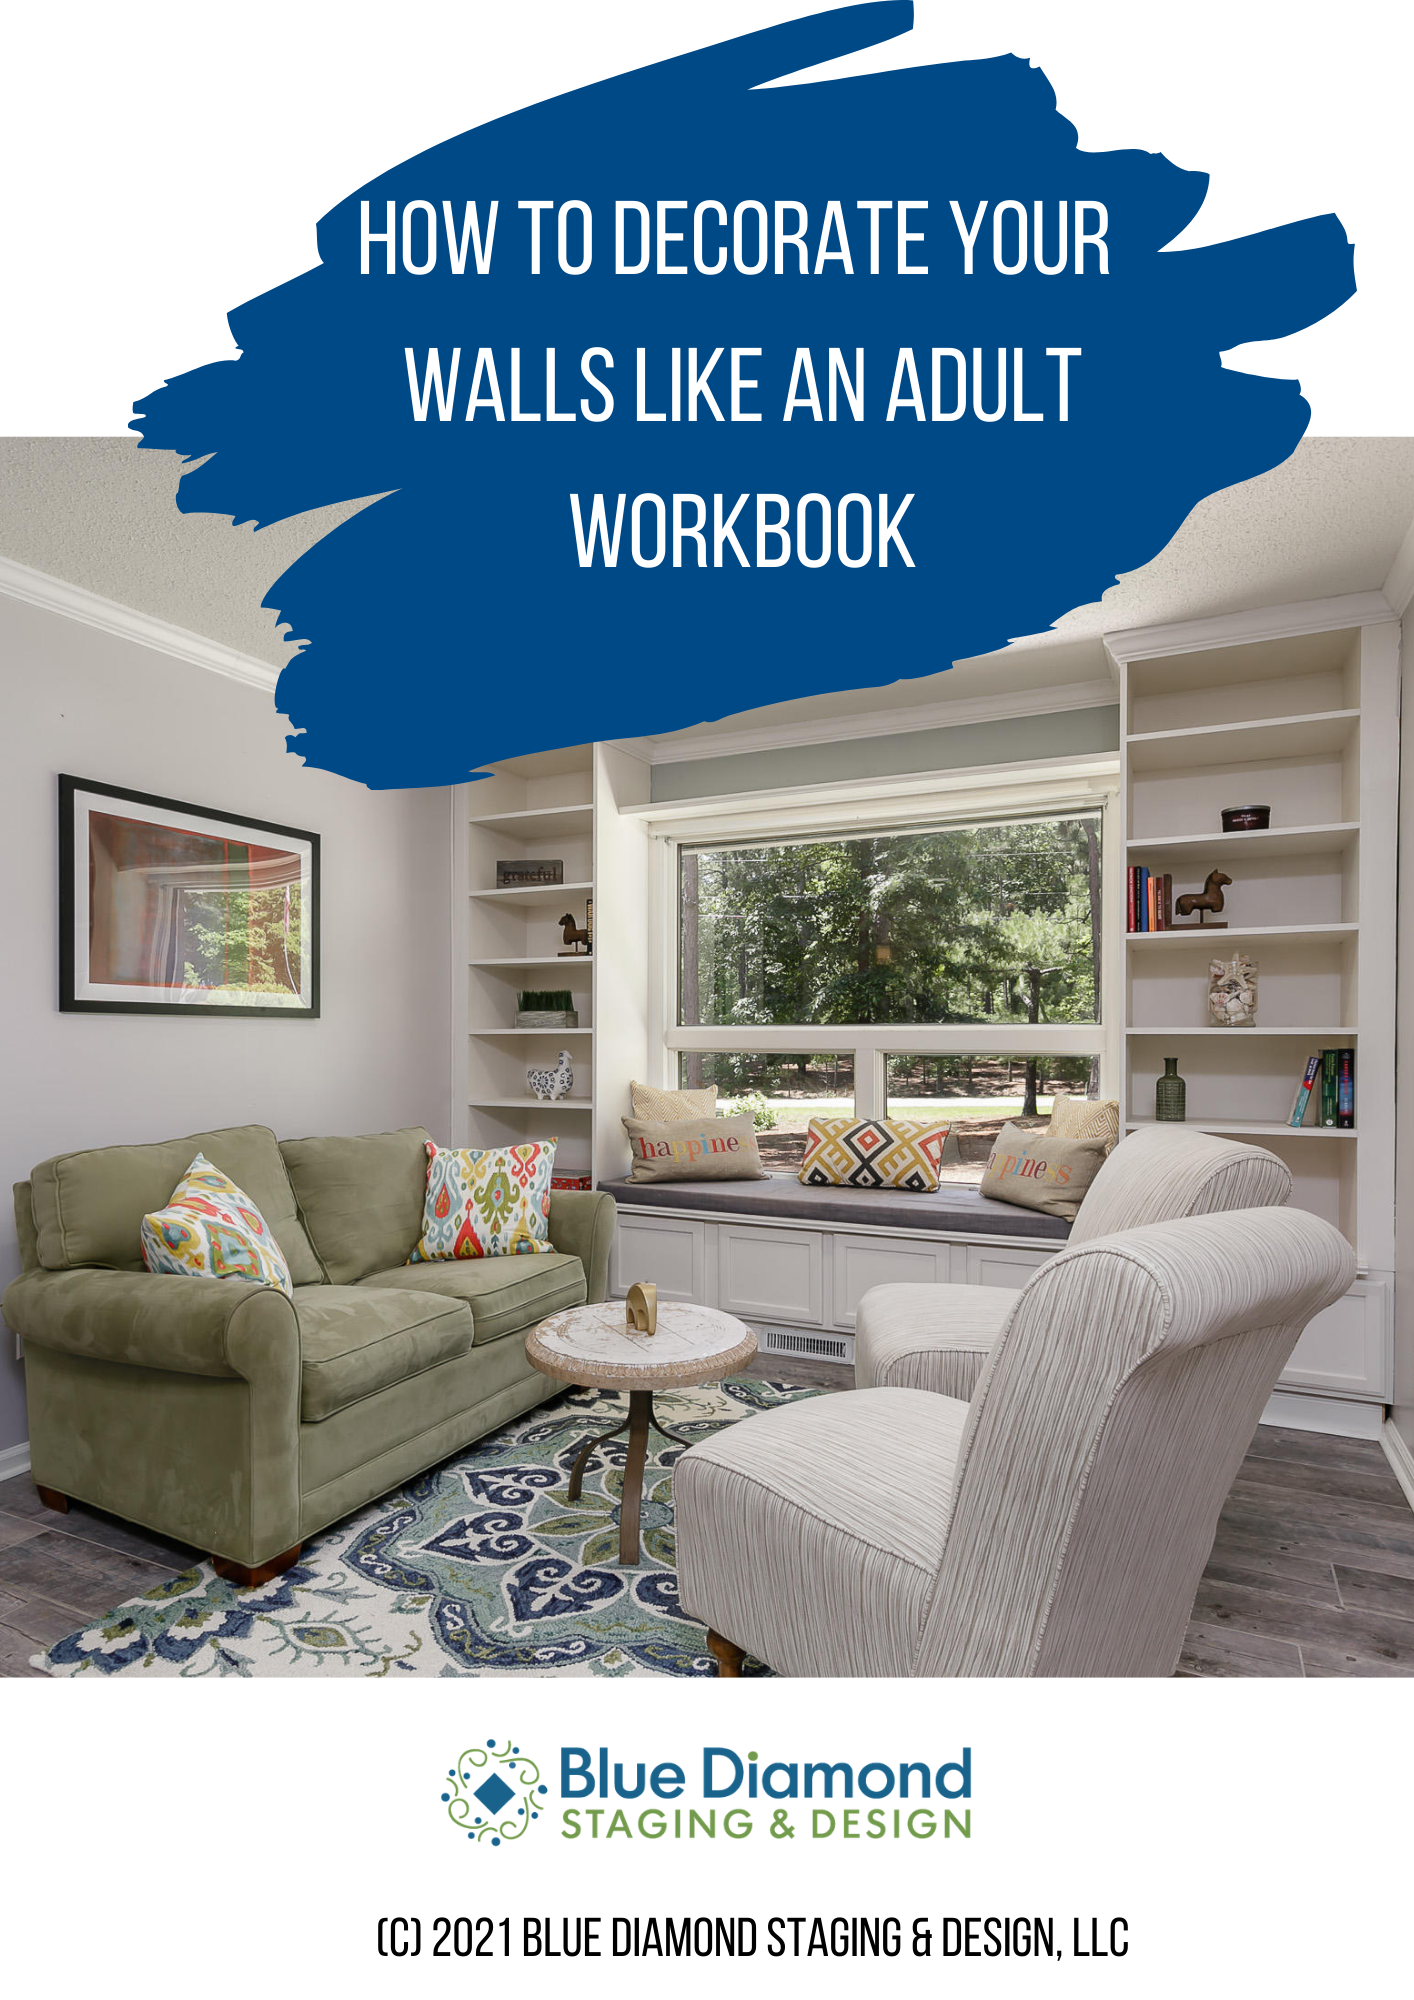 Decorate Your Walls like an Adult Workbook